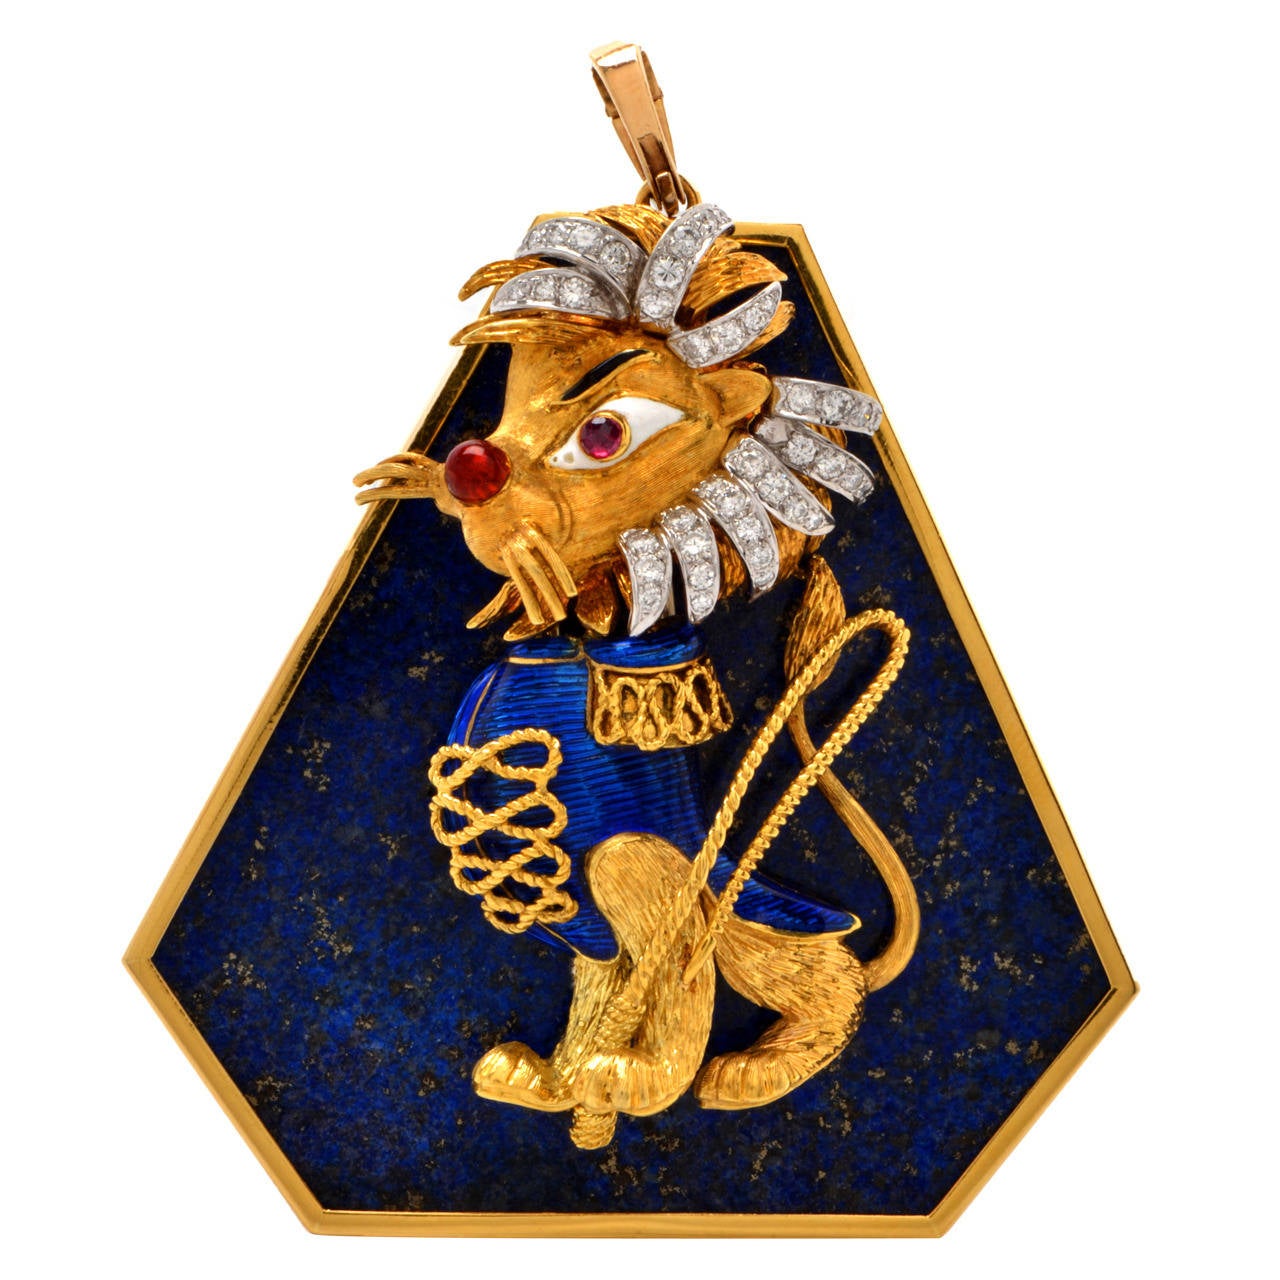 This vividly colored vintage lapel brooch / pendant is crafted in solid 18K yellow gold. This lapis pendent features a lion brooch pin with can be detached and worn separately. Lion pin is dressed humorously in a royal guard's uniform, rendered in